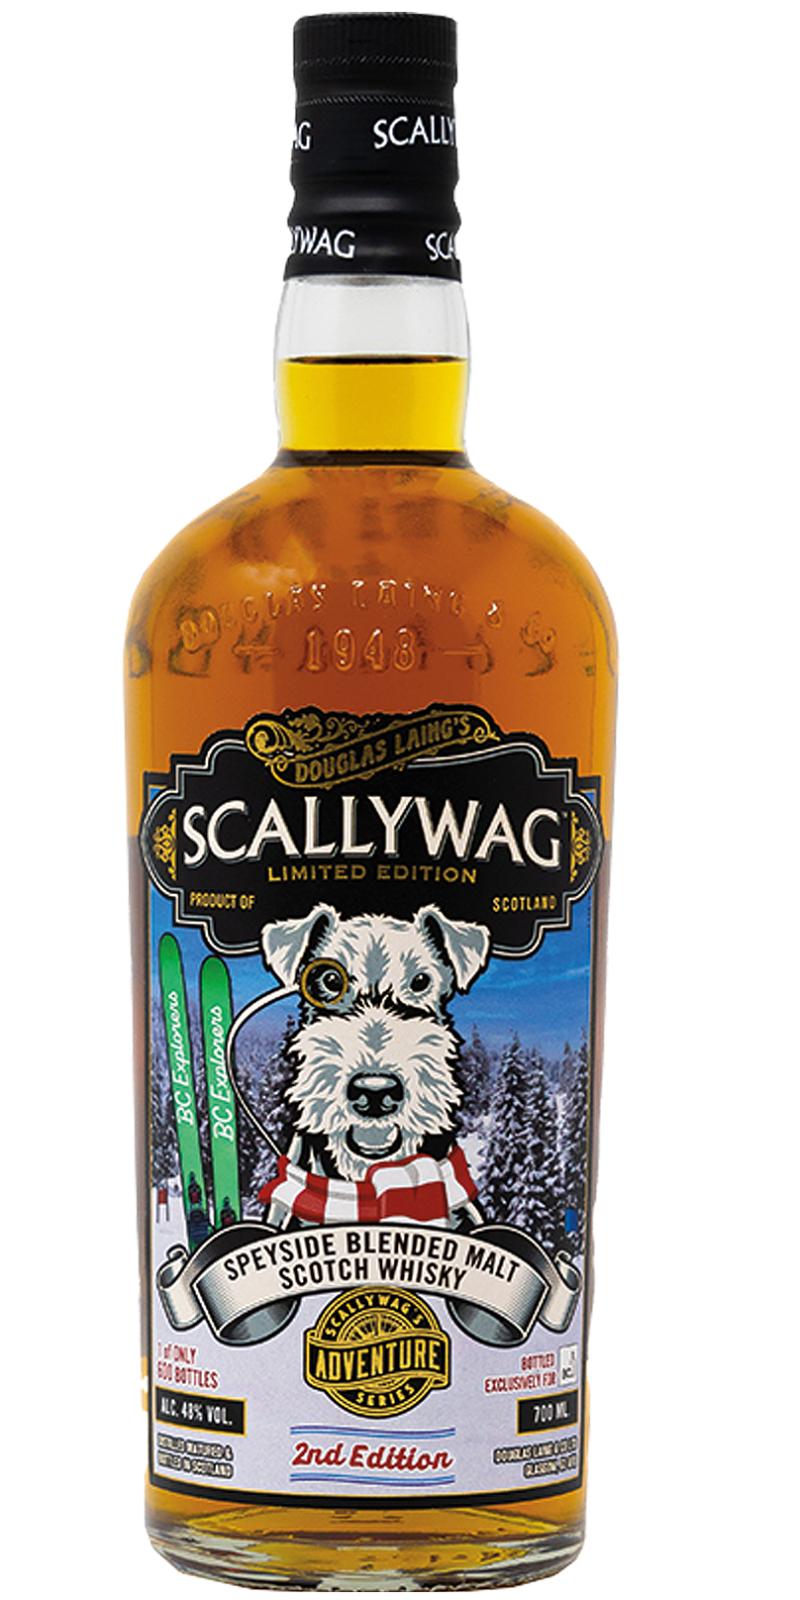 Scallywag Bcl 2nd edition DL bcliquorstores 48% 700ml